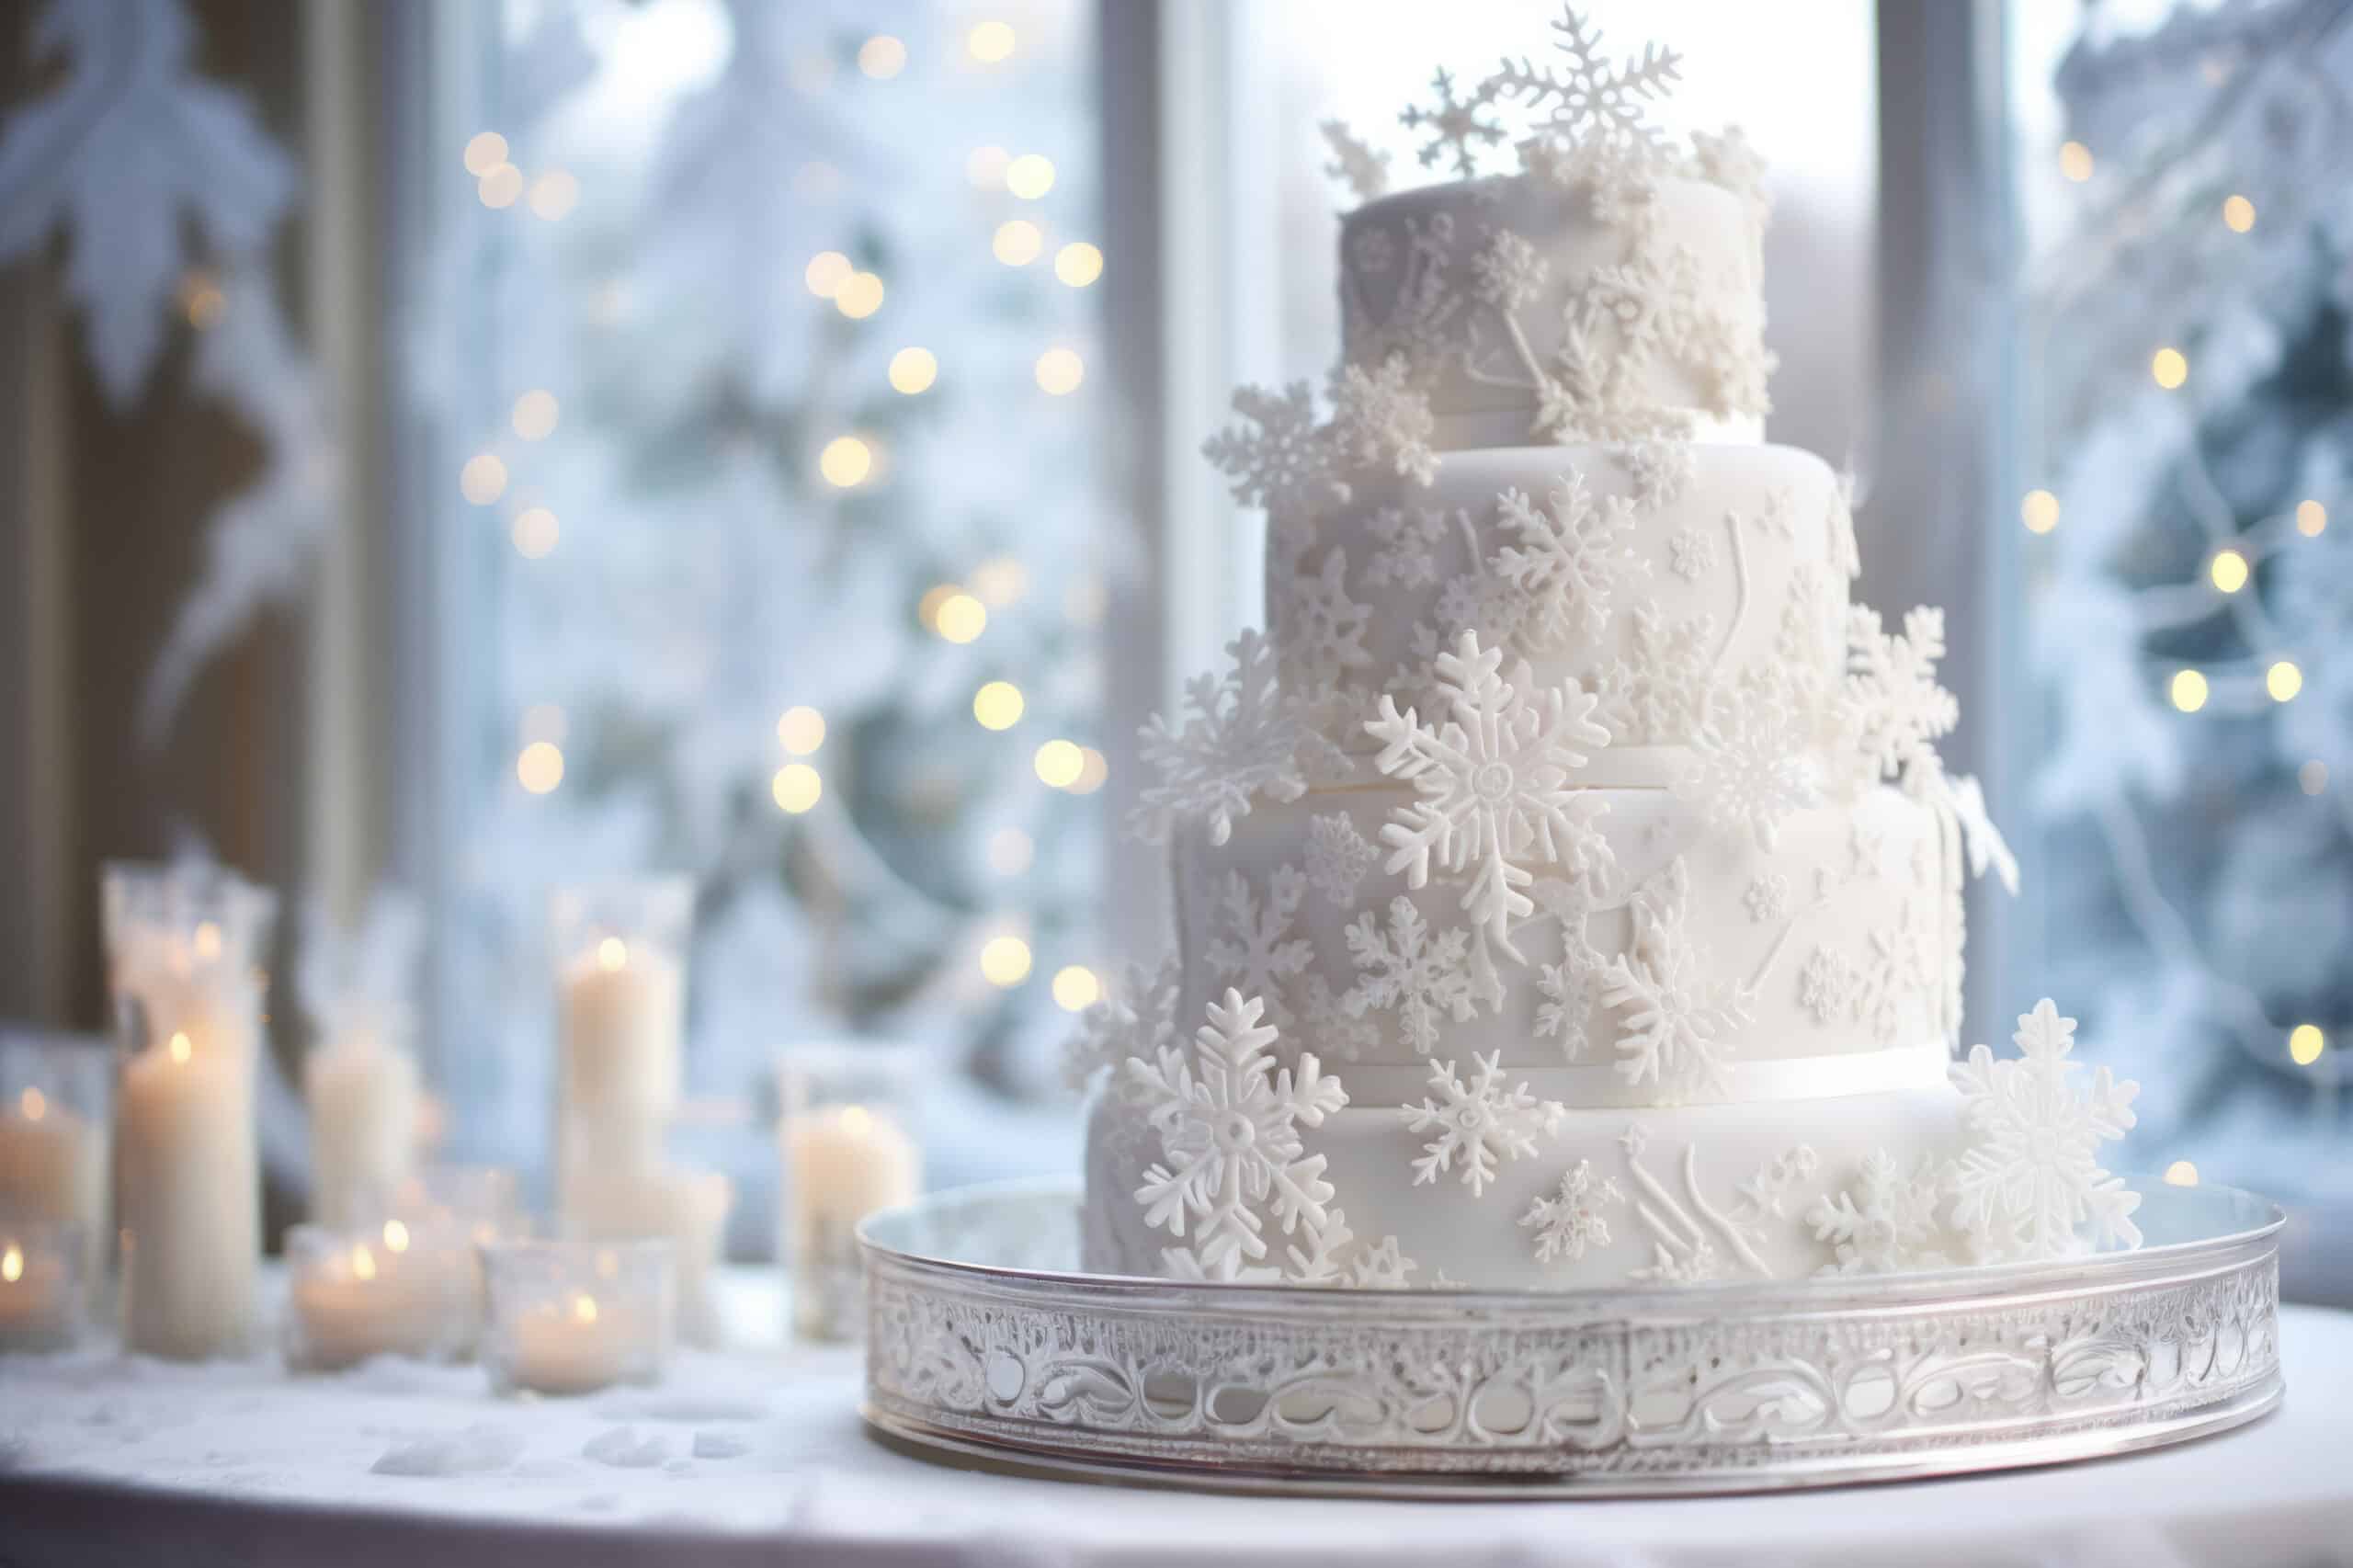 3 Tips for Throwing a Magical Winter Wedding